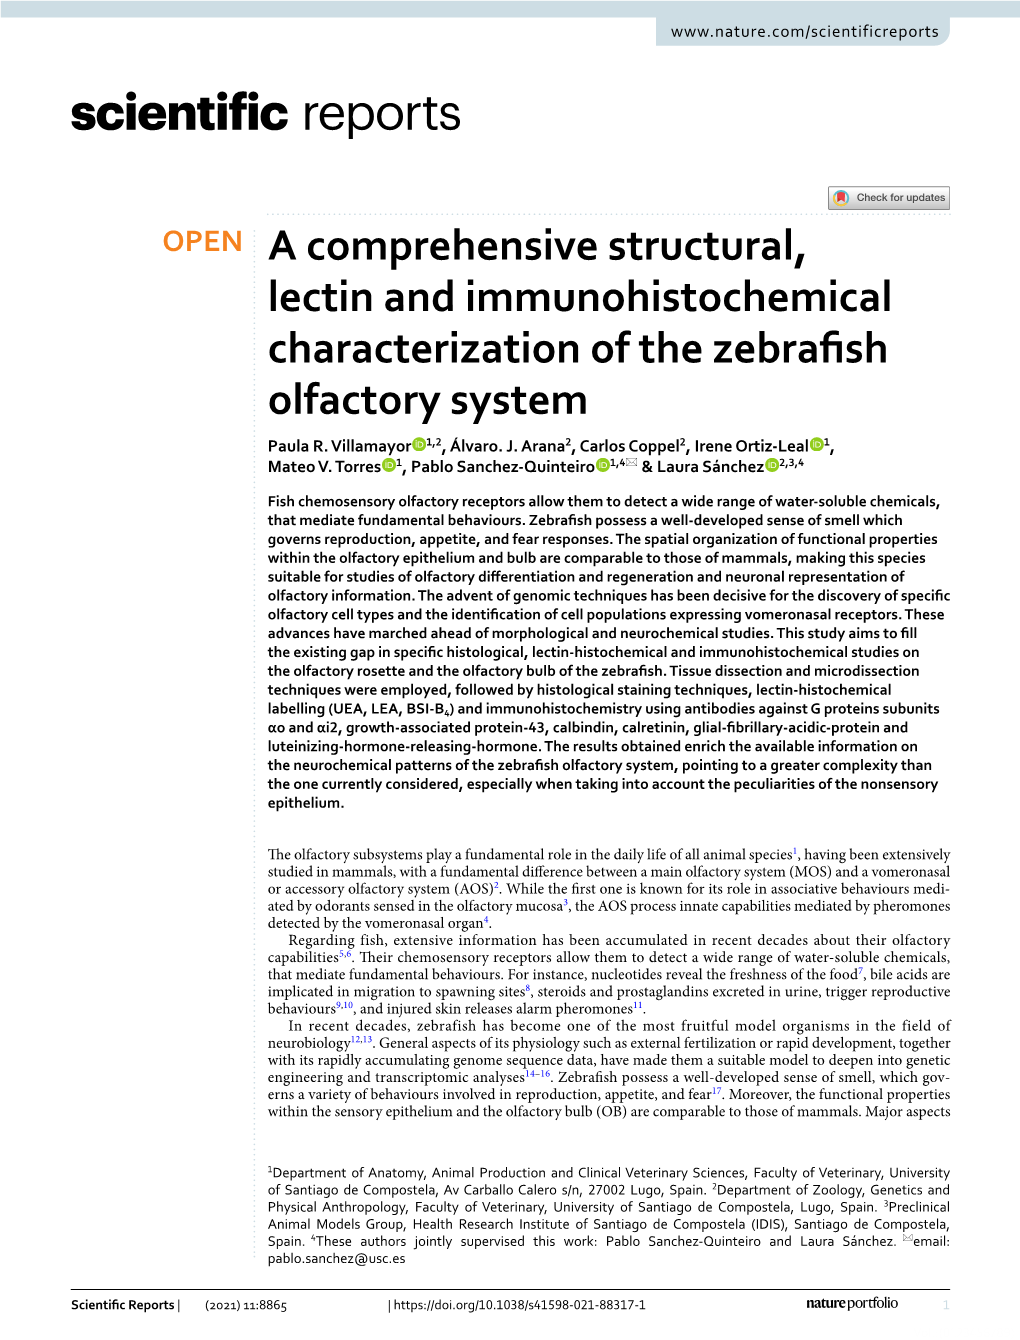 A Comprehensive Structural, Lectin and Immunohistochemical Characterization of the Zebrafsh Olfactory System Paula R